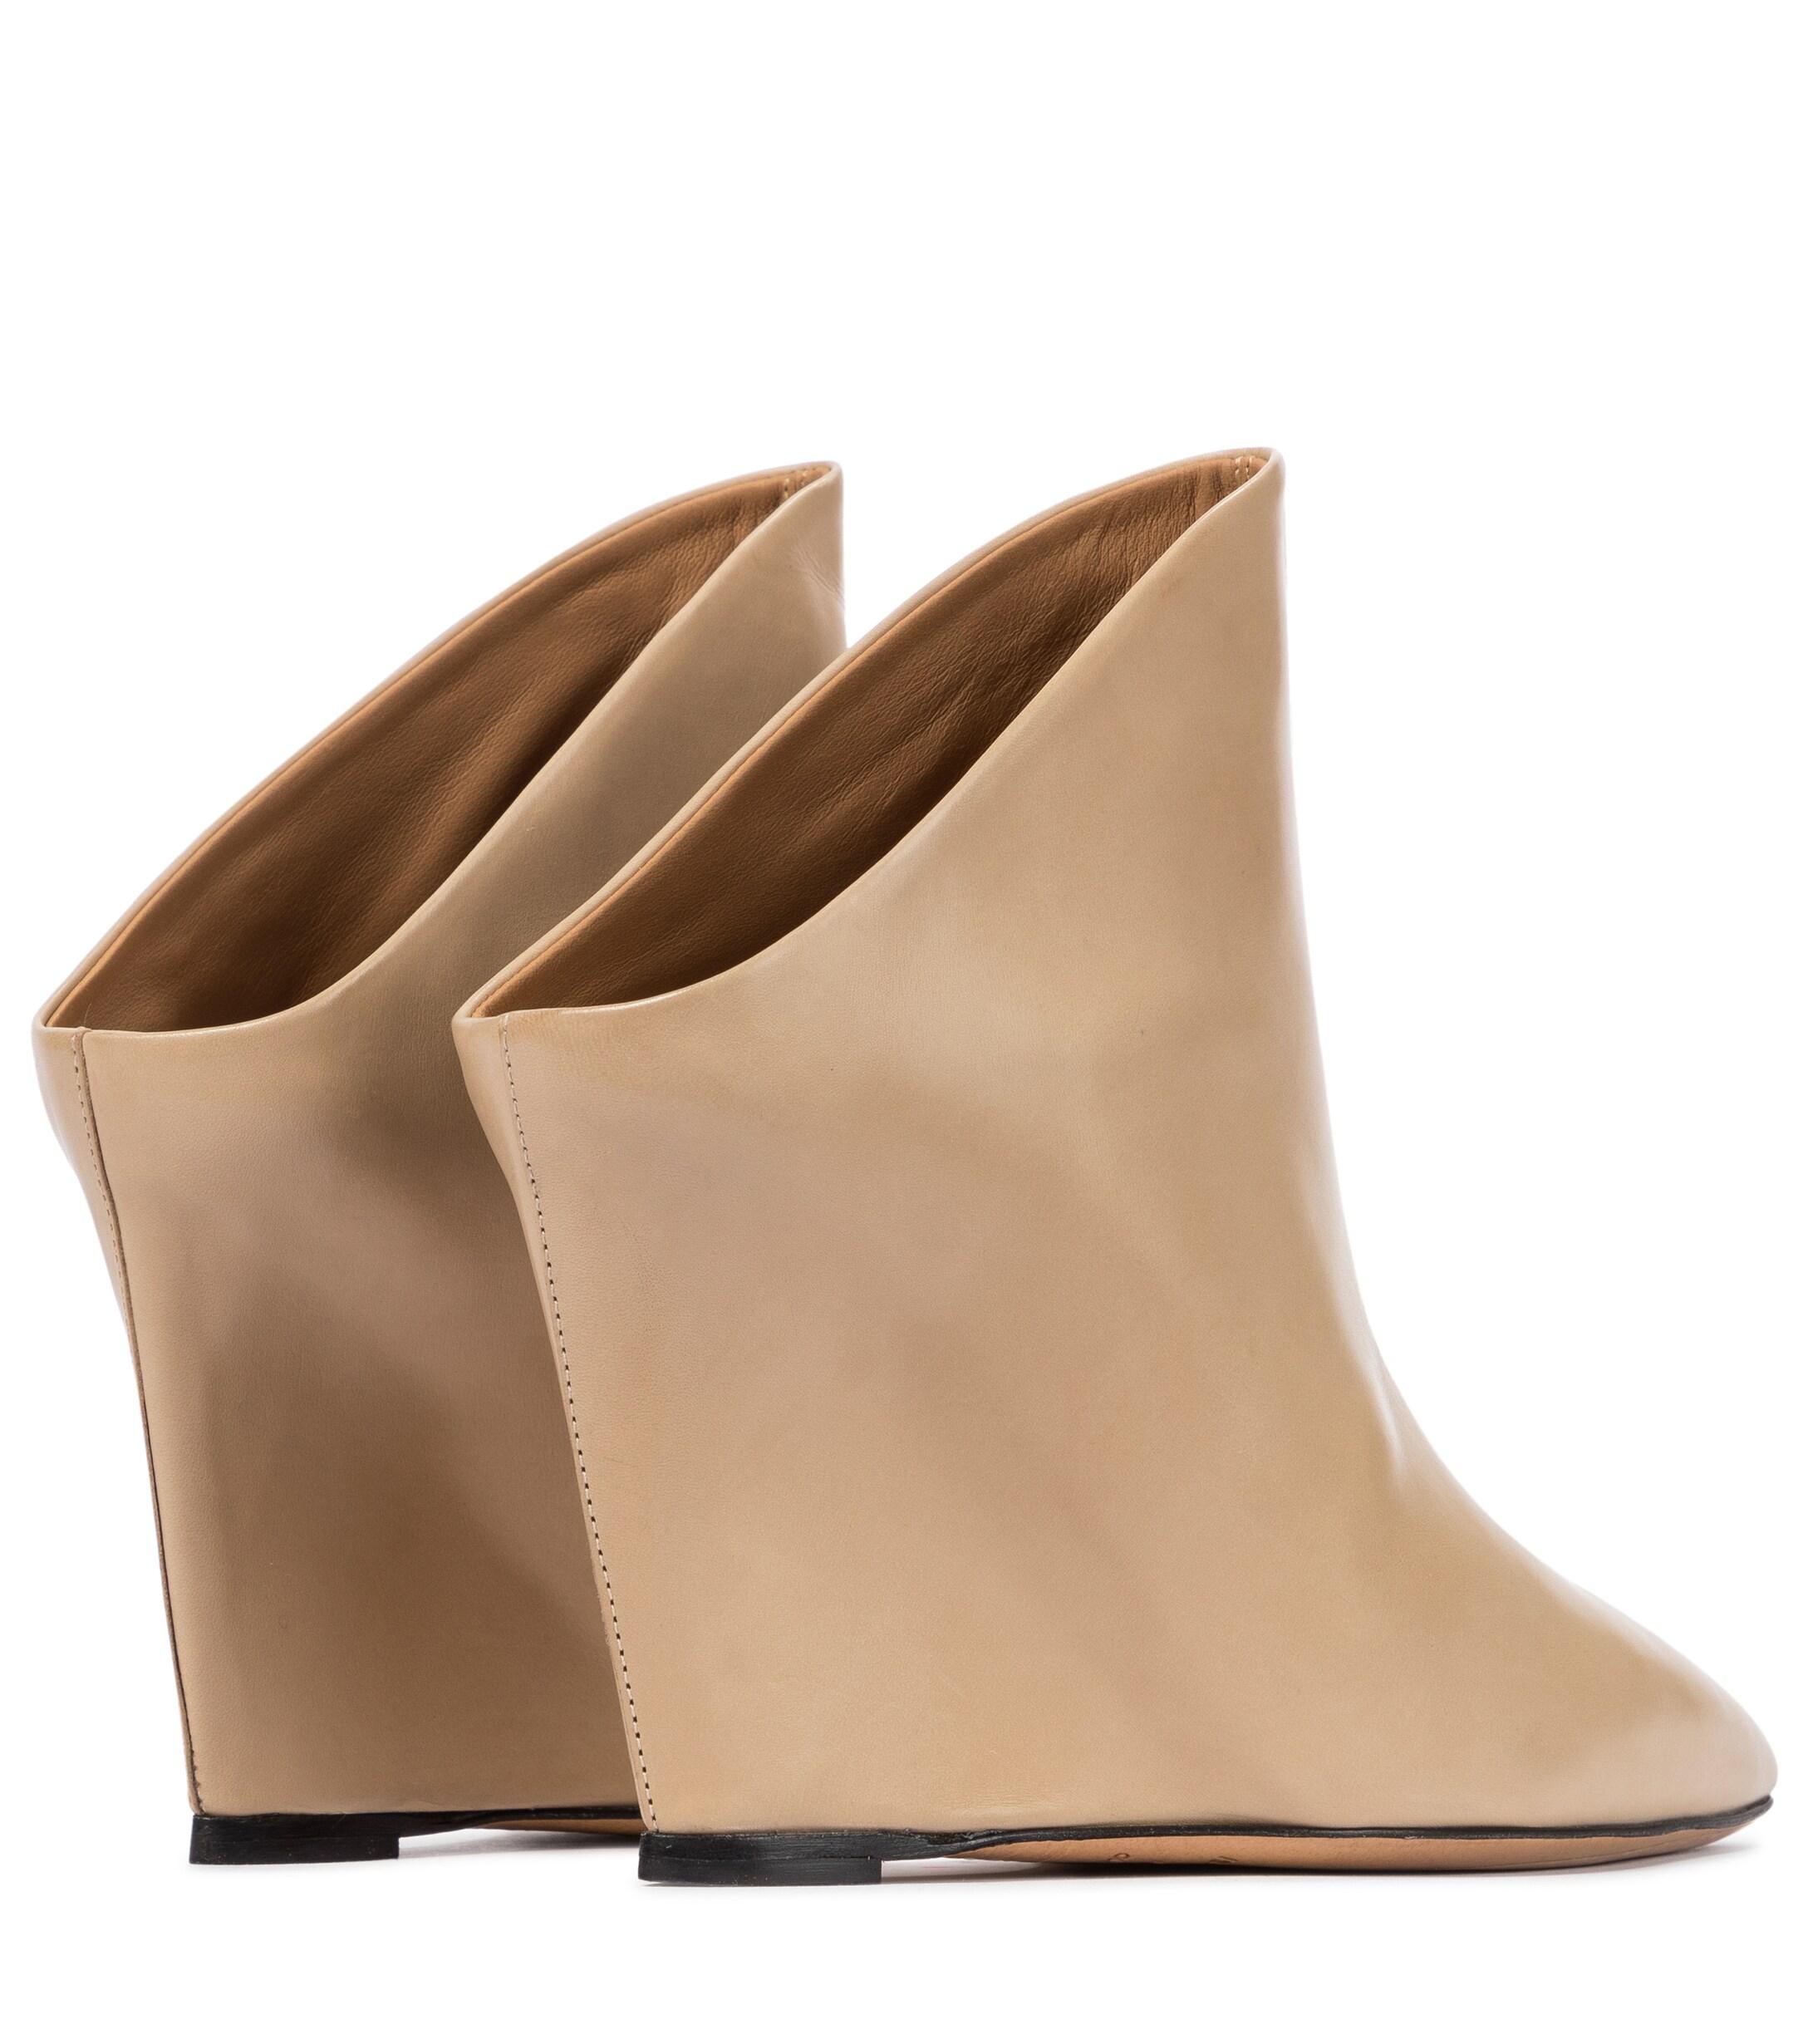 Isabel Marant Tykat 90 Wedge Leather Mules in Beige (Natural) - Save 14% -  Lyst